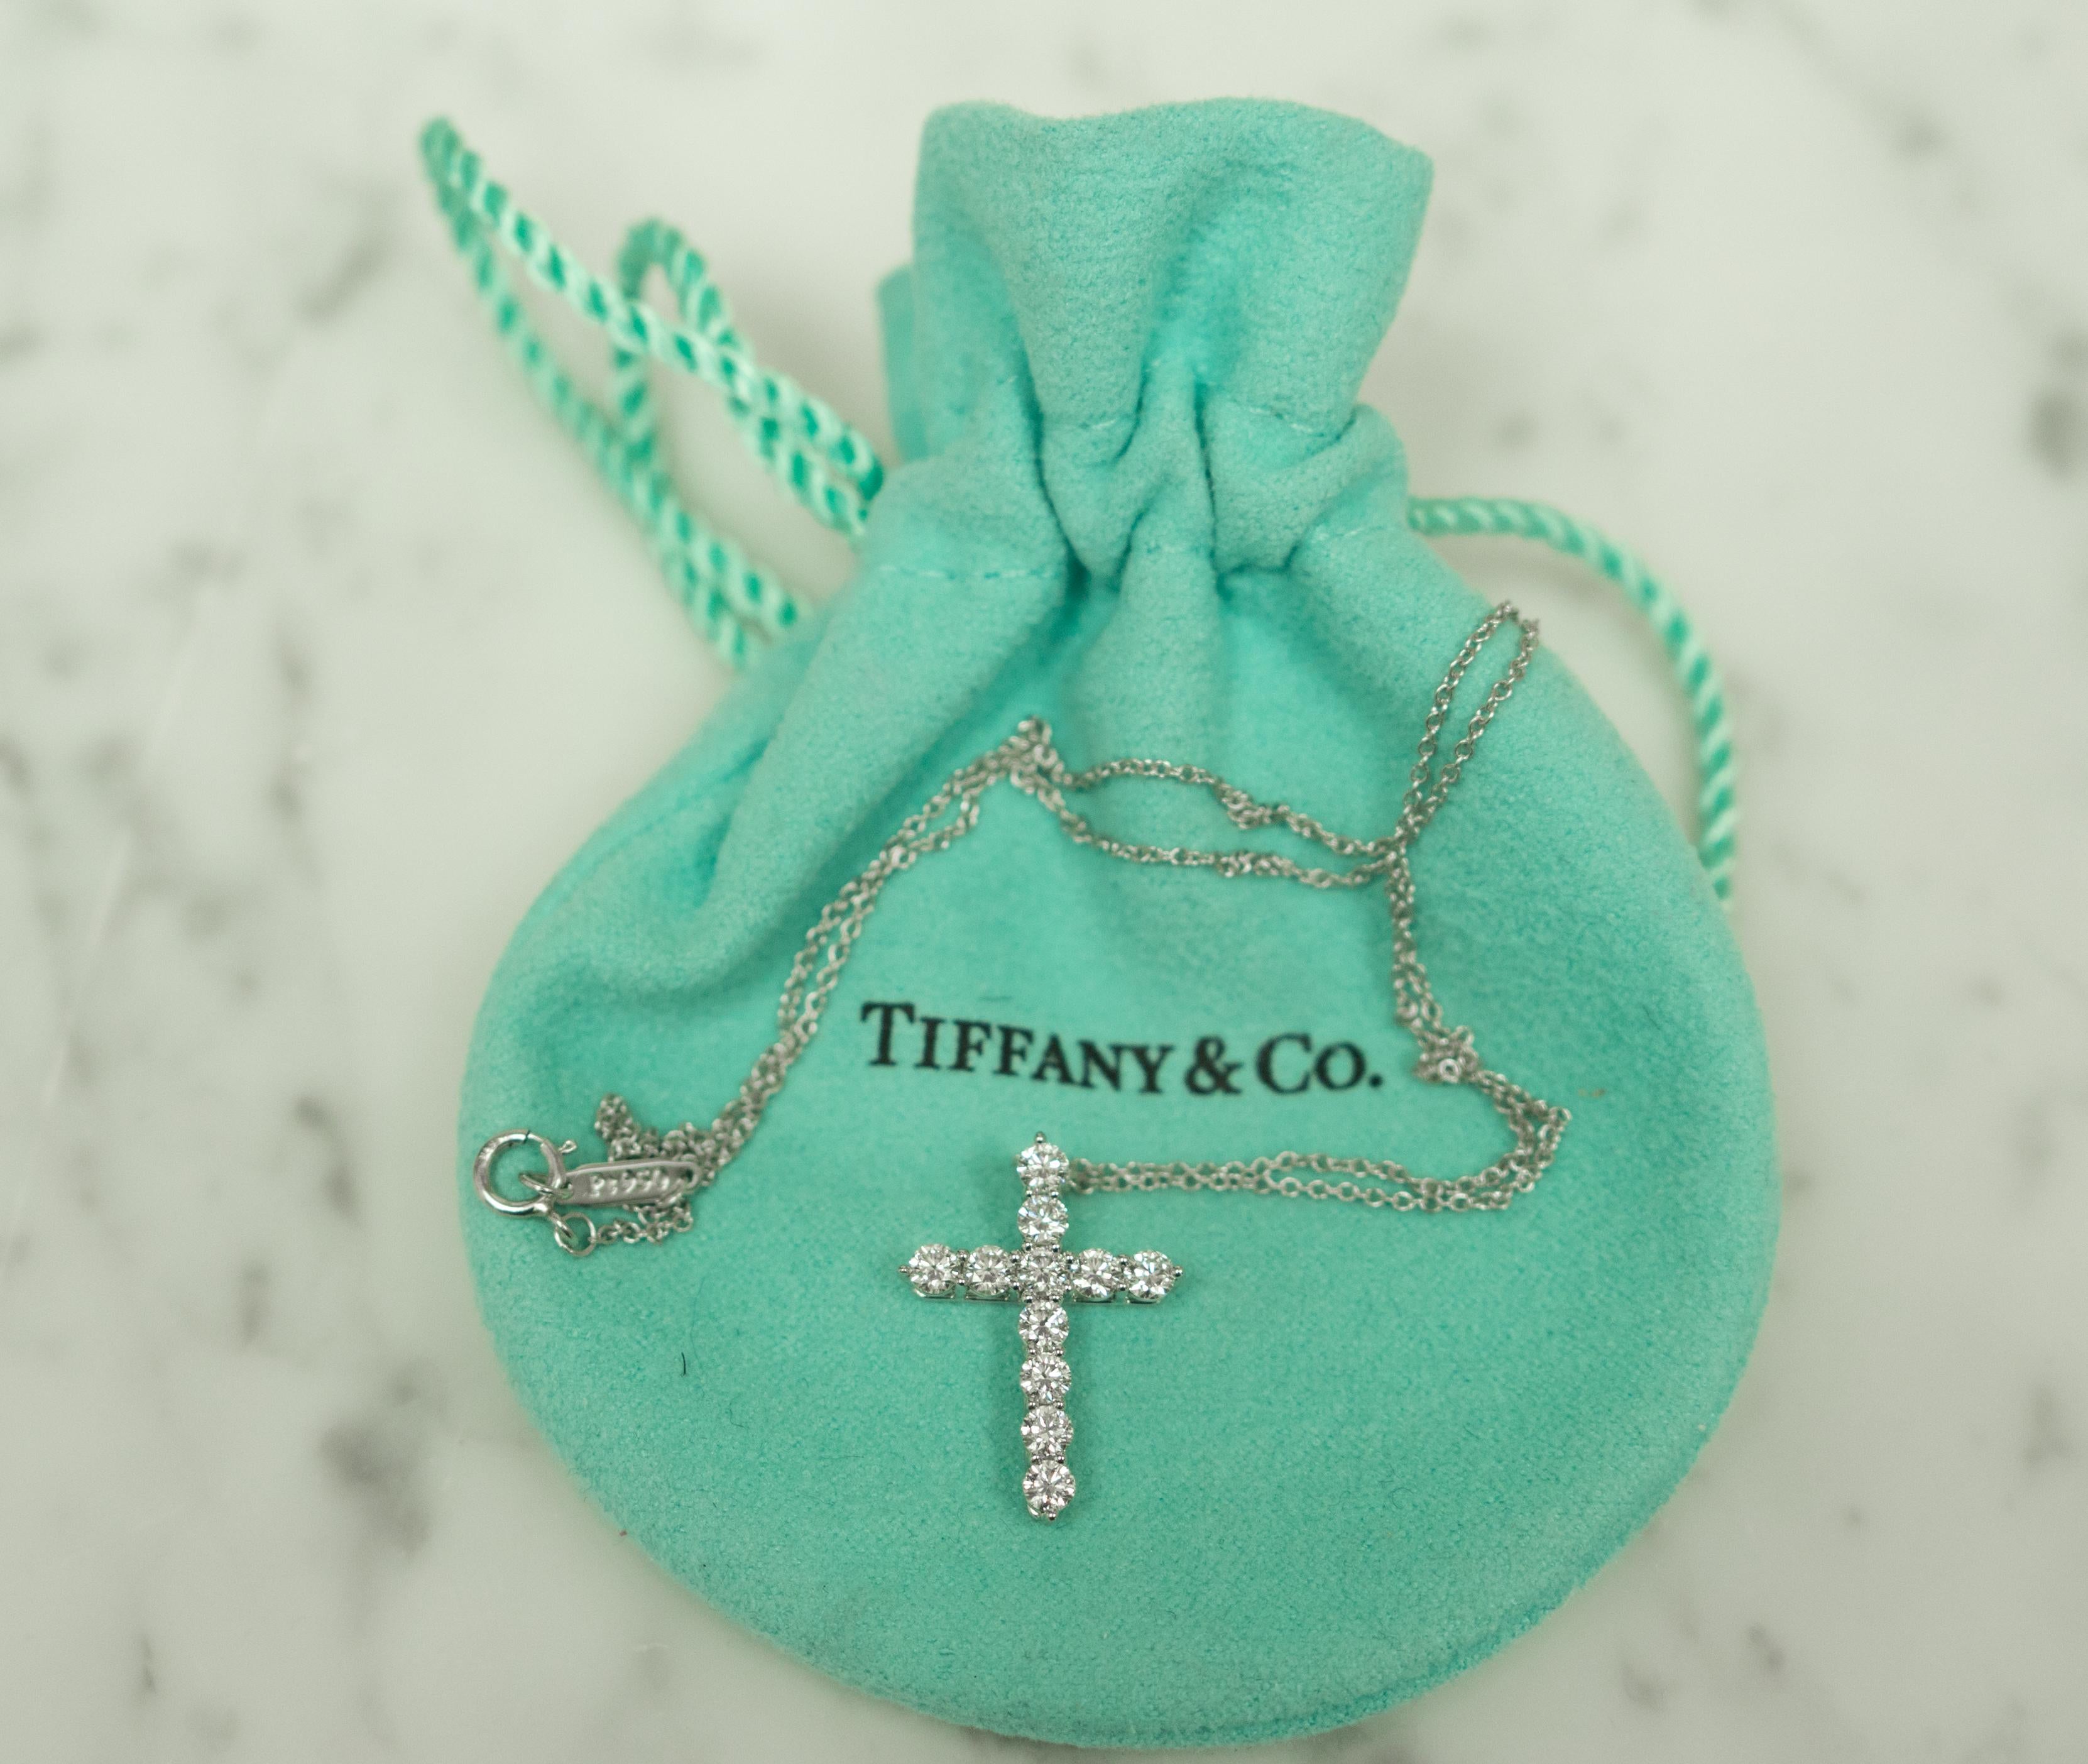 Tiffany & Co. Medium diamond Cross pendant in platinum with 11 round brilliant diamonds, E-F Color , VS clarity,  with total weight of .90 carats on a 16